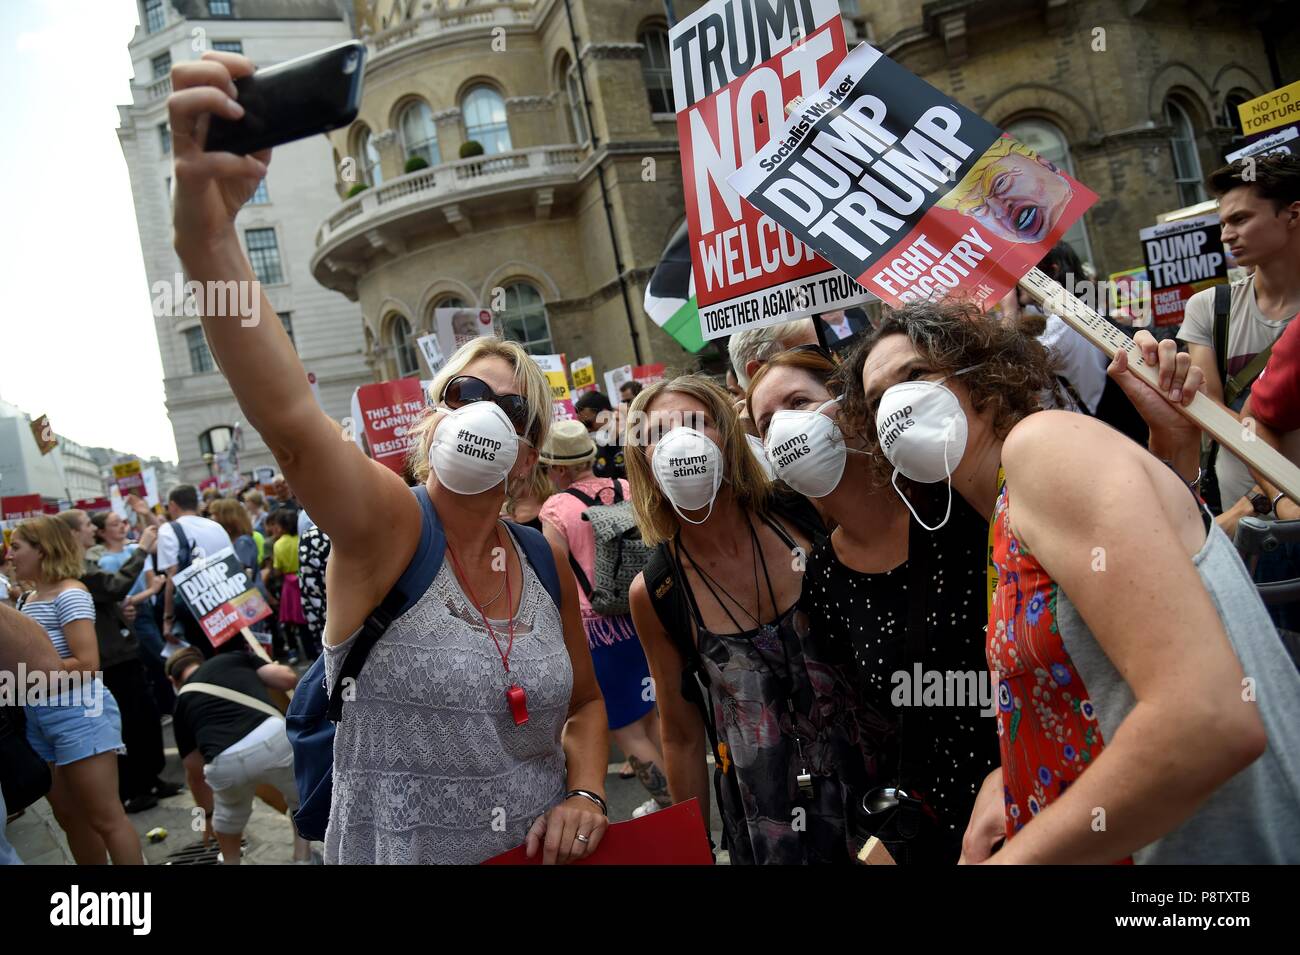 London, UK. 13th July 2018. Protest march against the UK visit by US President Donald Trump, London, UK Credit: Finnbarr Webster/Alamy Live News Stock Photo